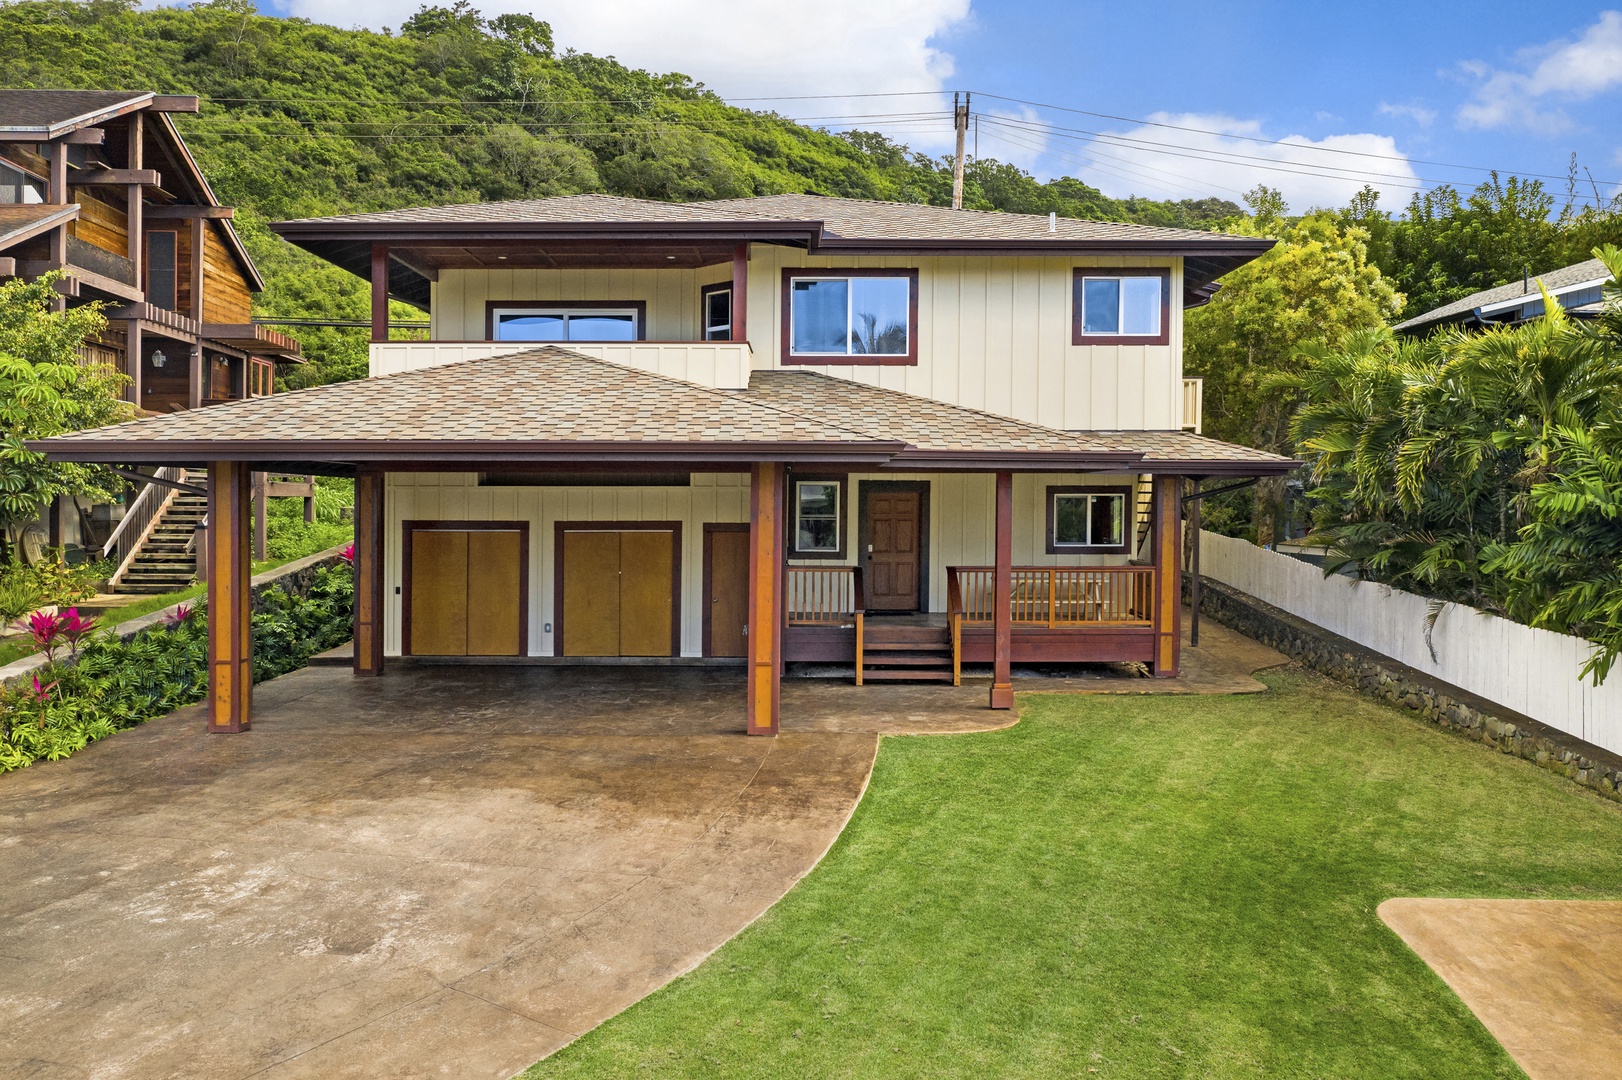 Haleiwa Vacation Rentals, Waimea Dream - A front view of the home.